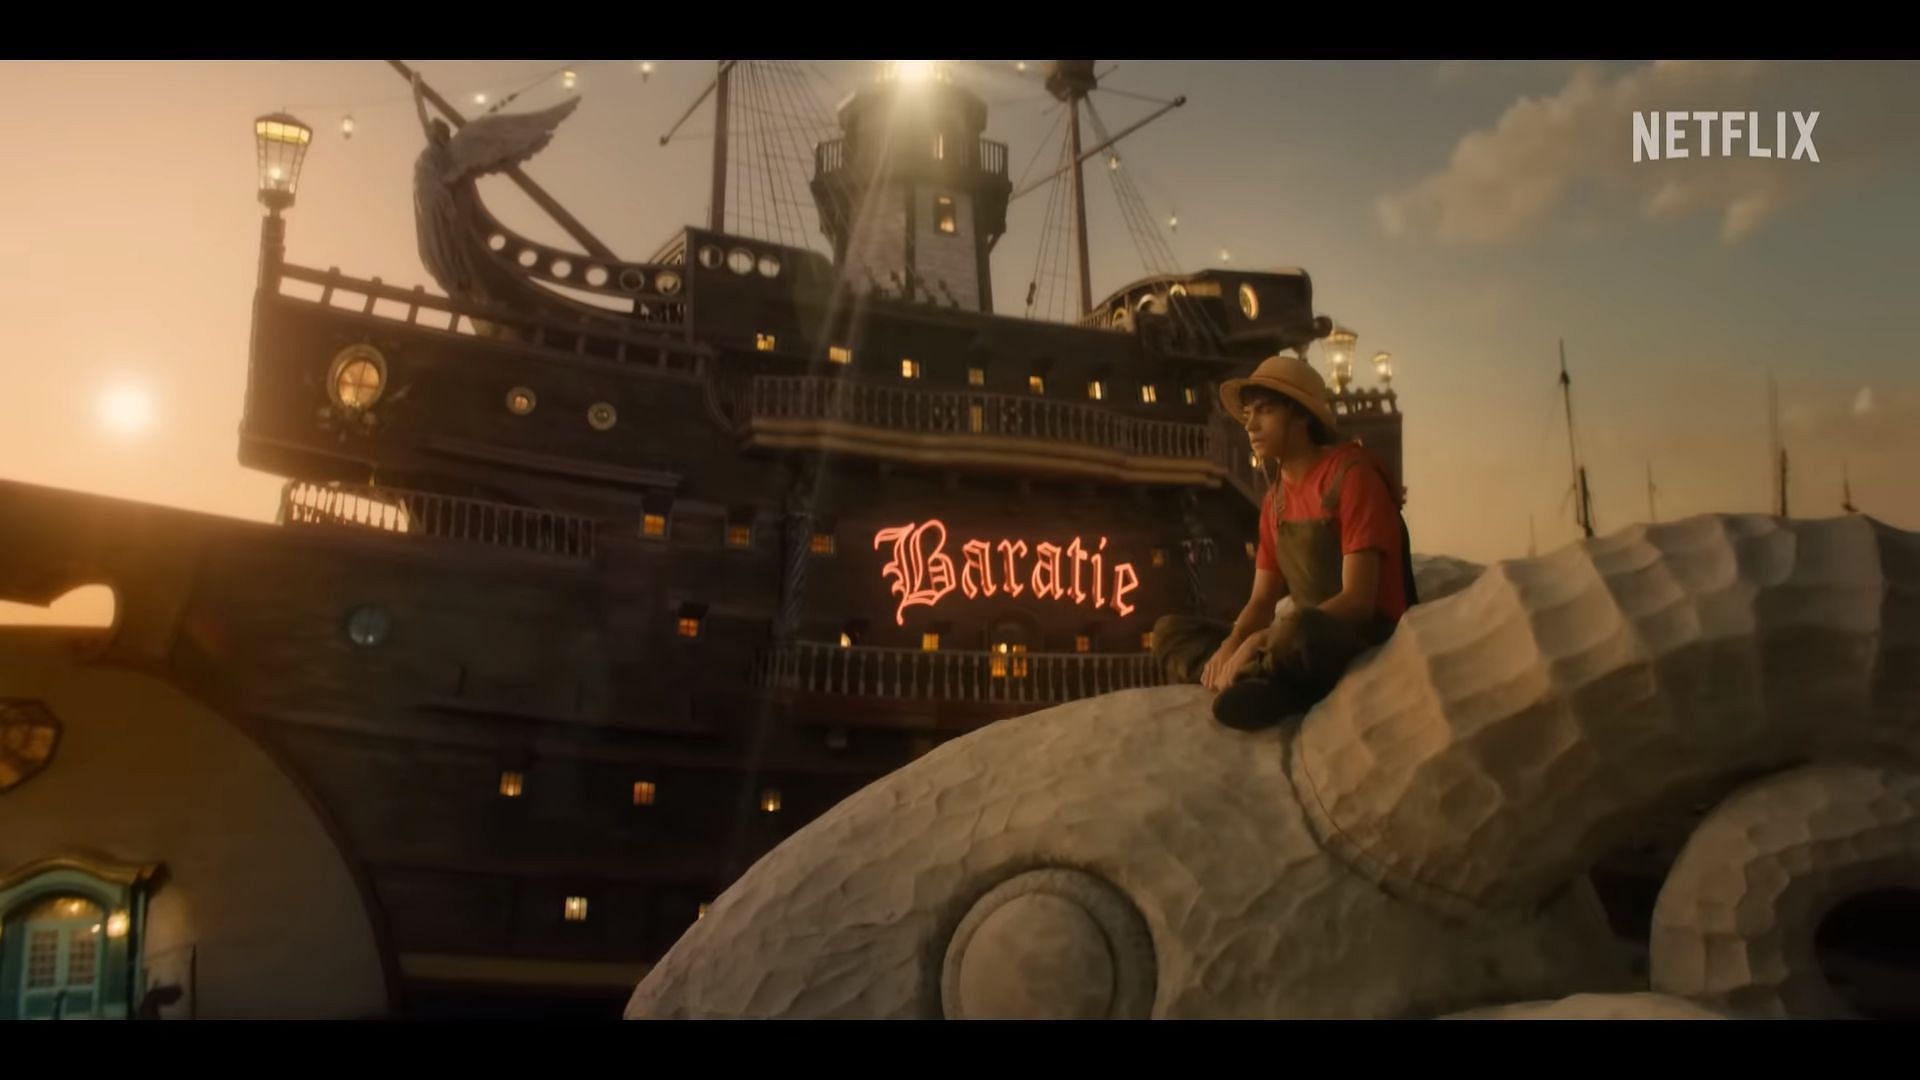 Monkey D. Luffy at Baratie in the live-action series (Image via Netflix)